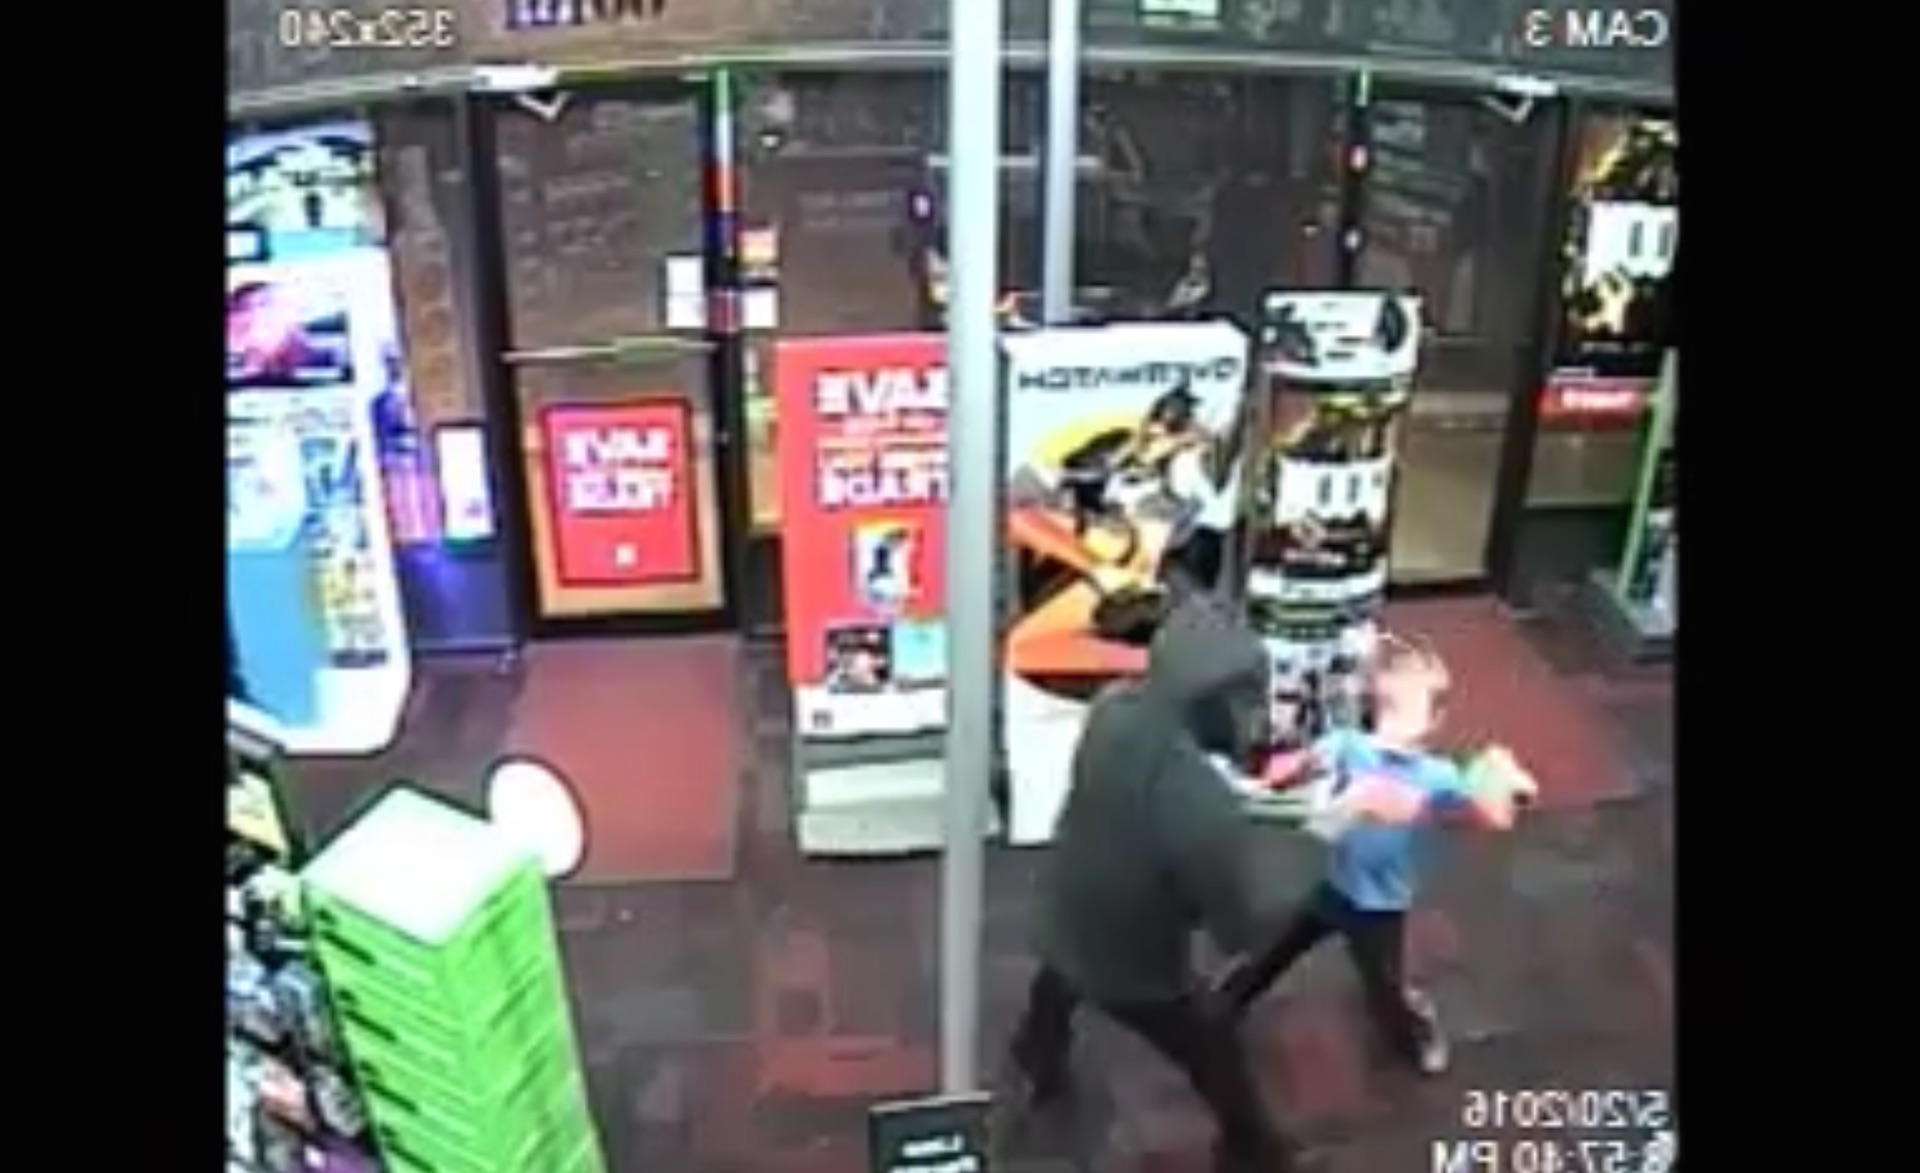 Little Boy Tries To Stop Armed Robbery At Md Gamestop Store The